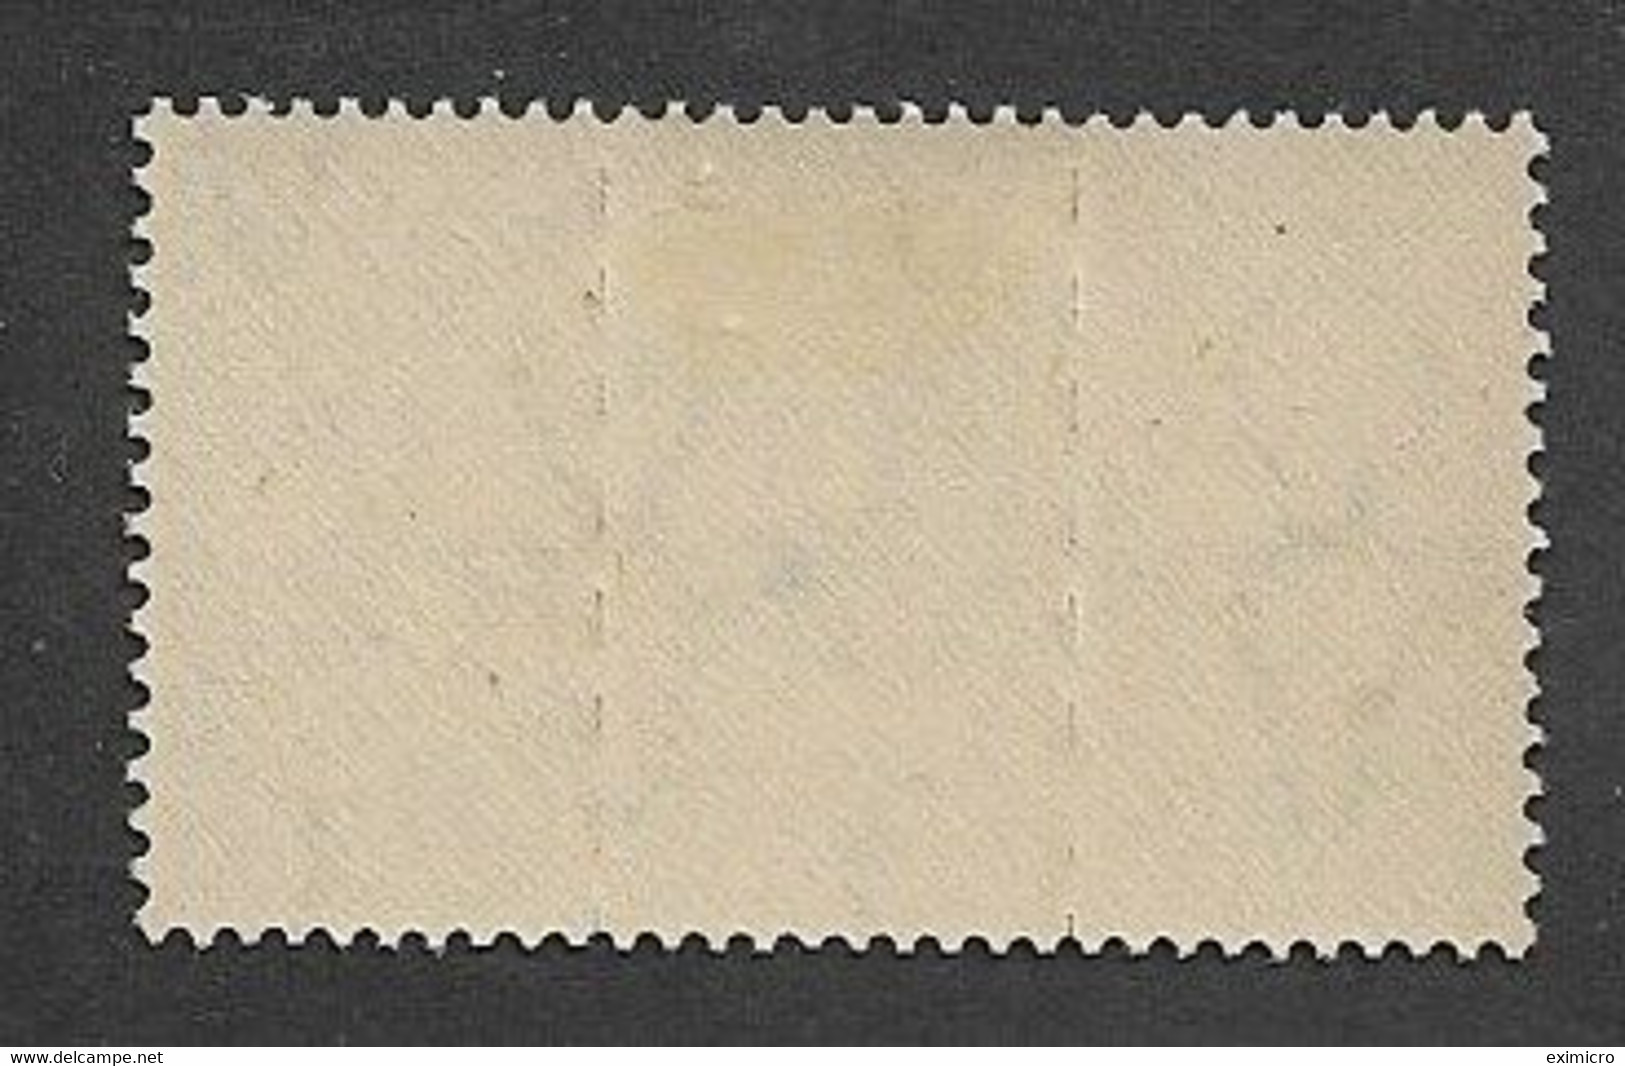 SOUTH AFRICA 1944 ½d POSTAGE DUE UNIT OF 3 SG D30 UNMOUNTED/MOUNTED MINT Cat £13 - Timbres-taxe